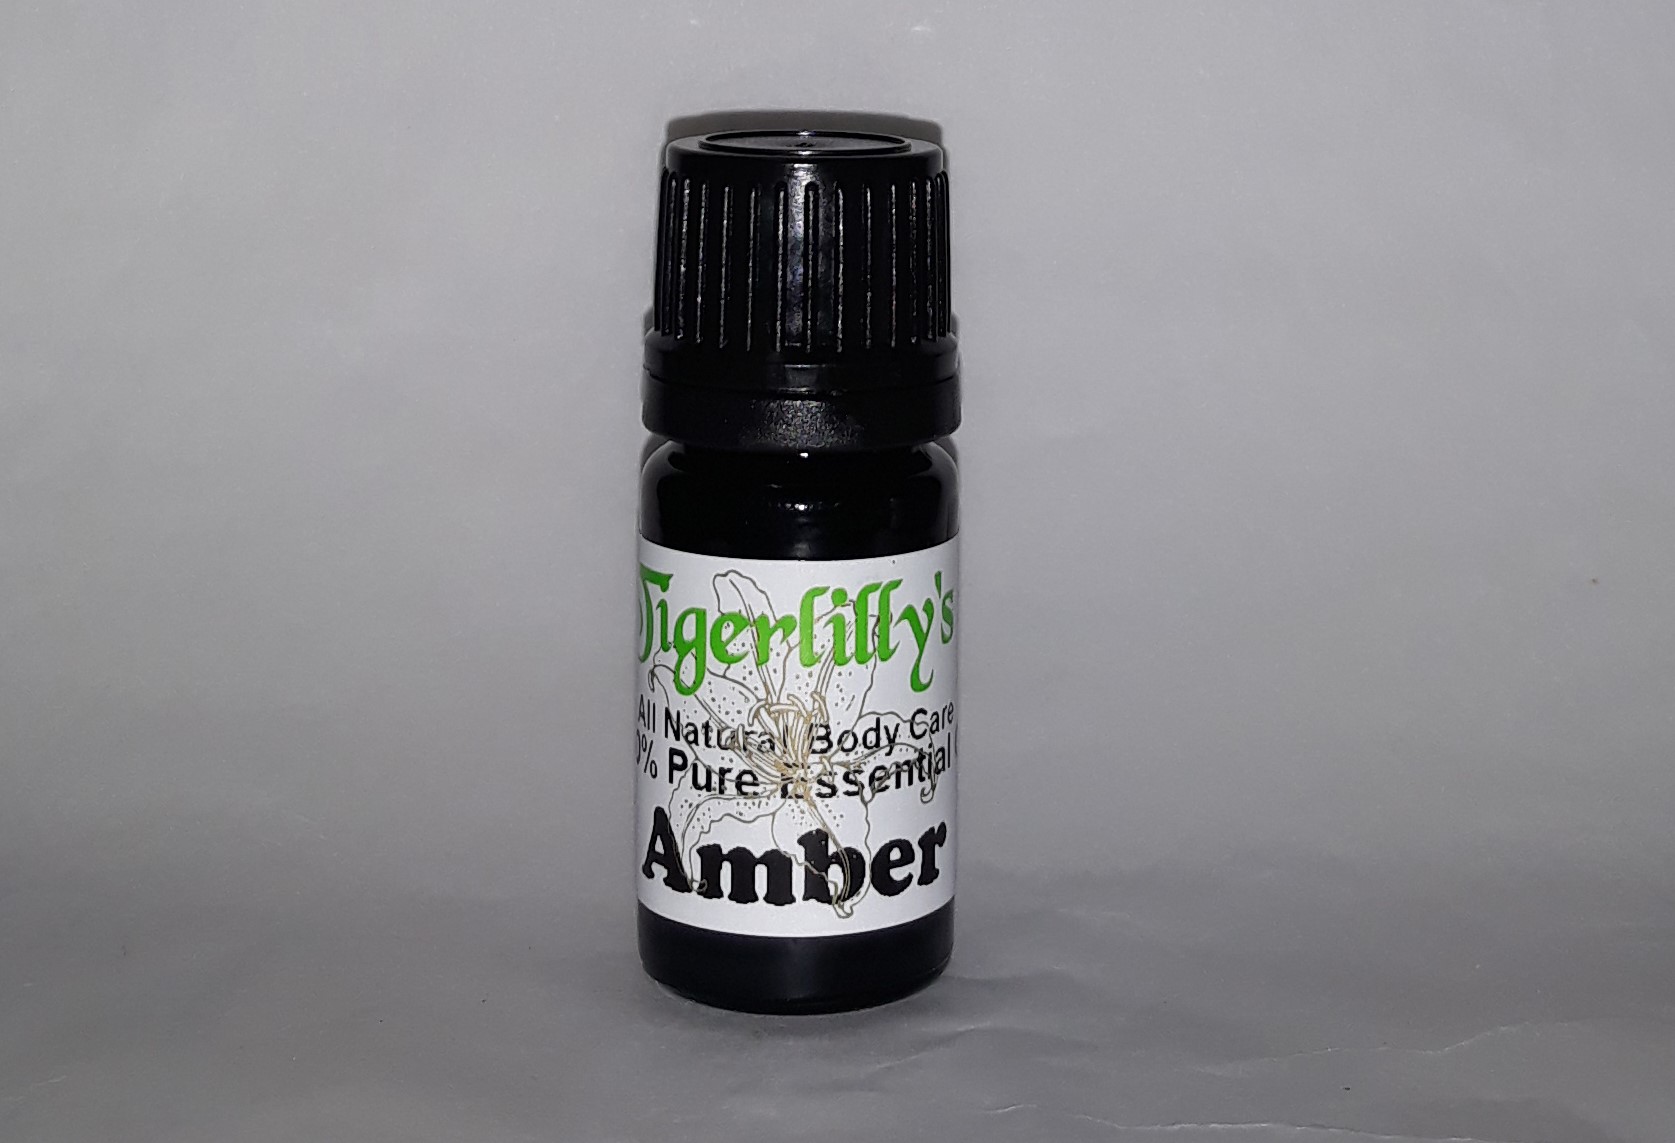 Amber Essential Oil - Tigerlilly's - Natural Skin Care Products